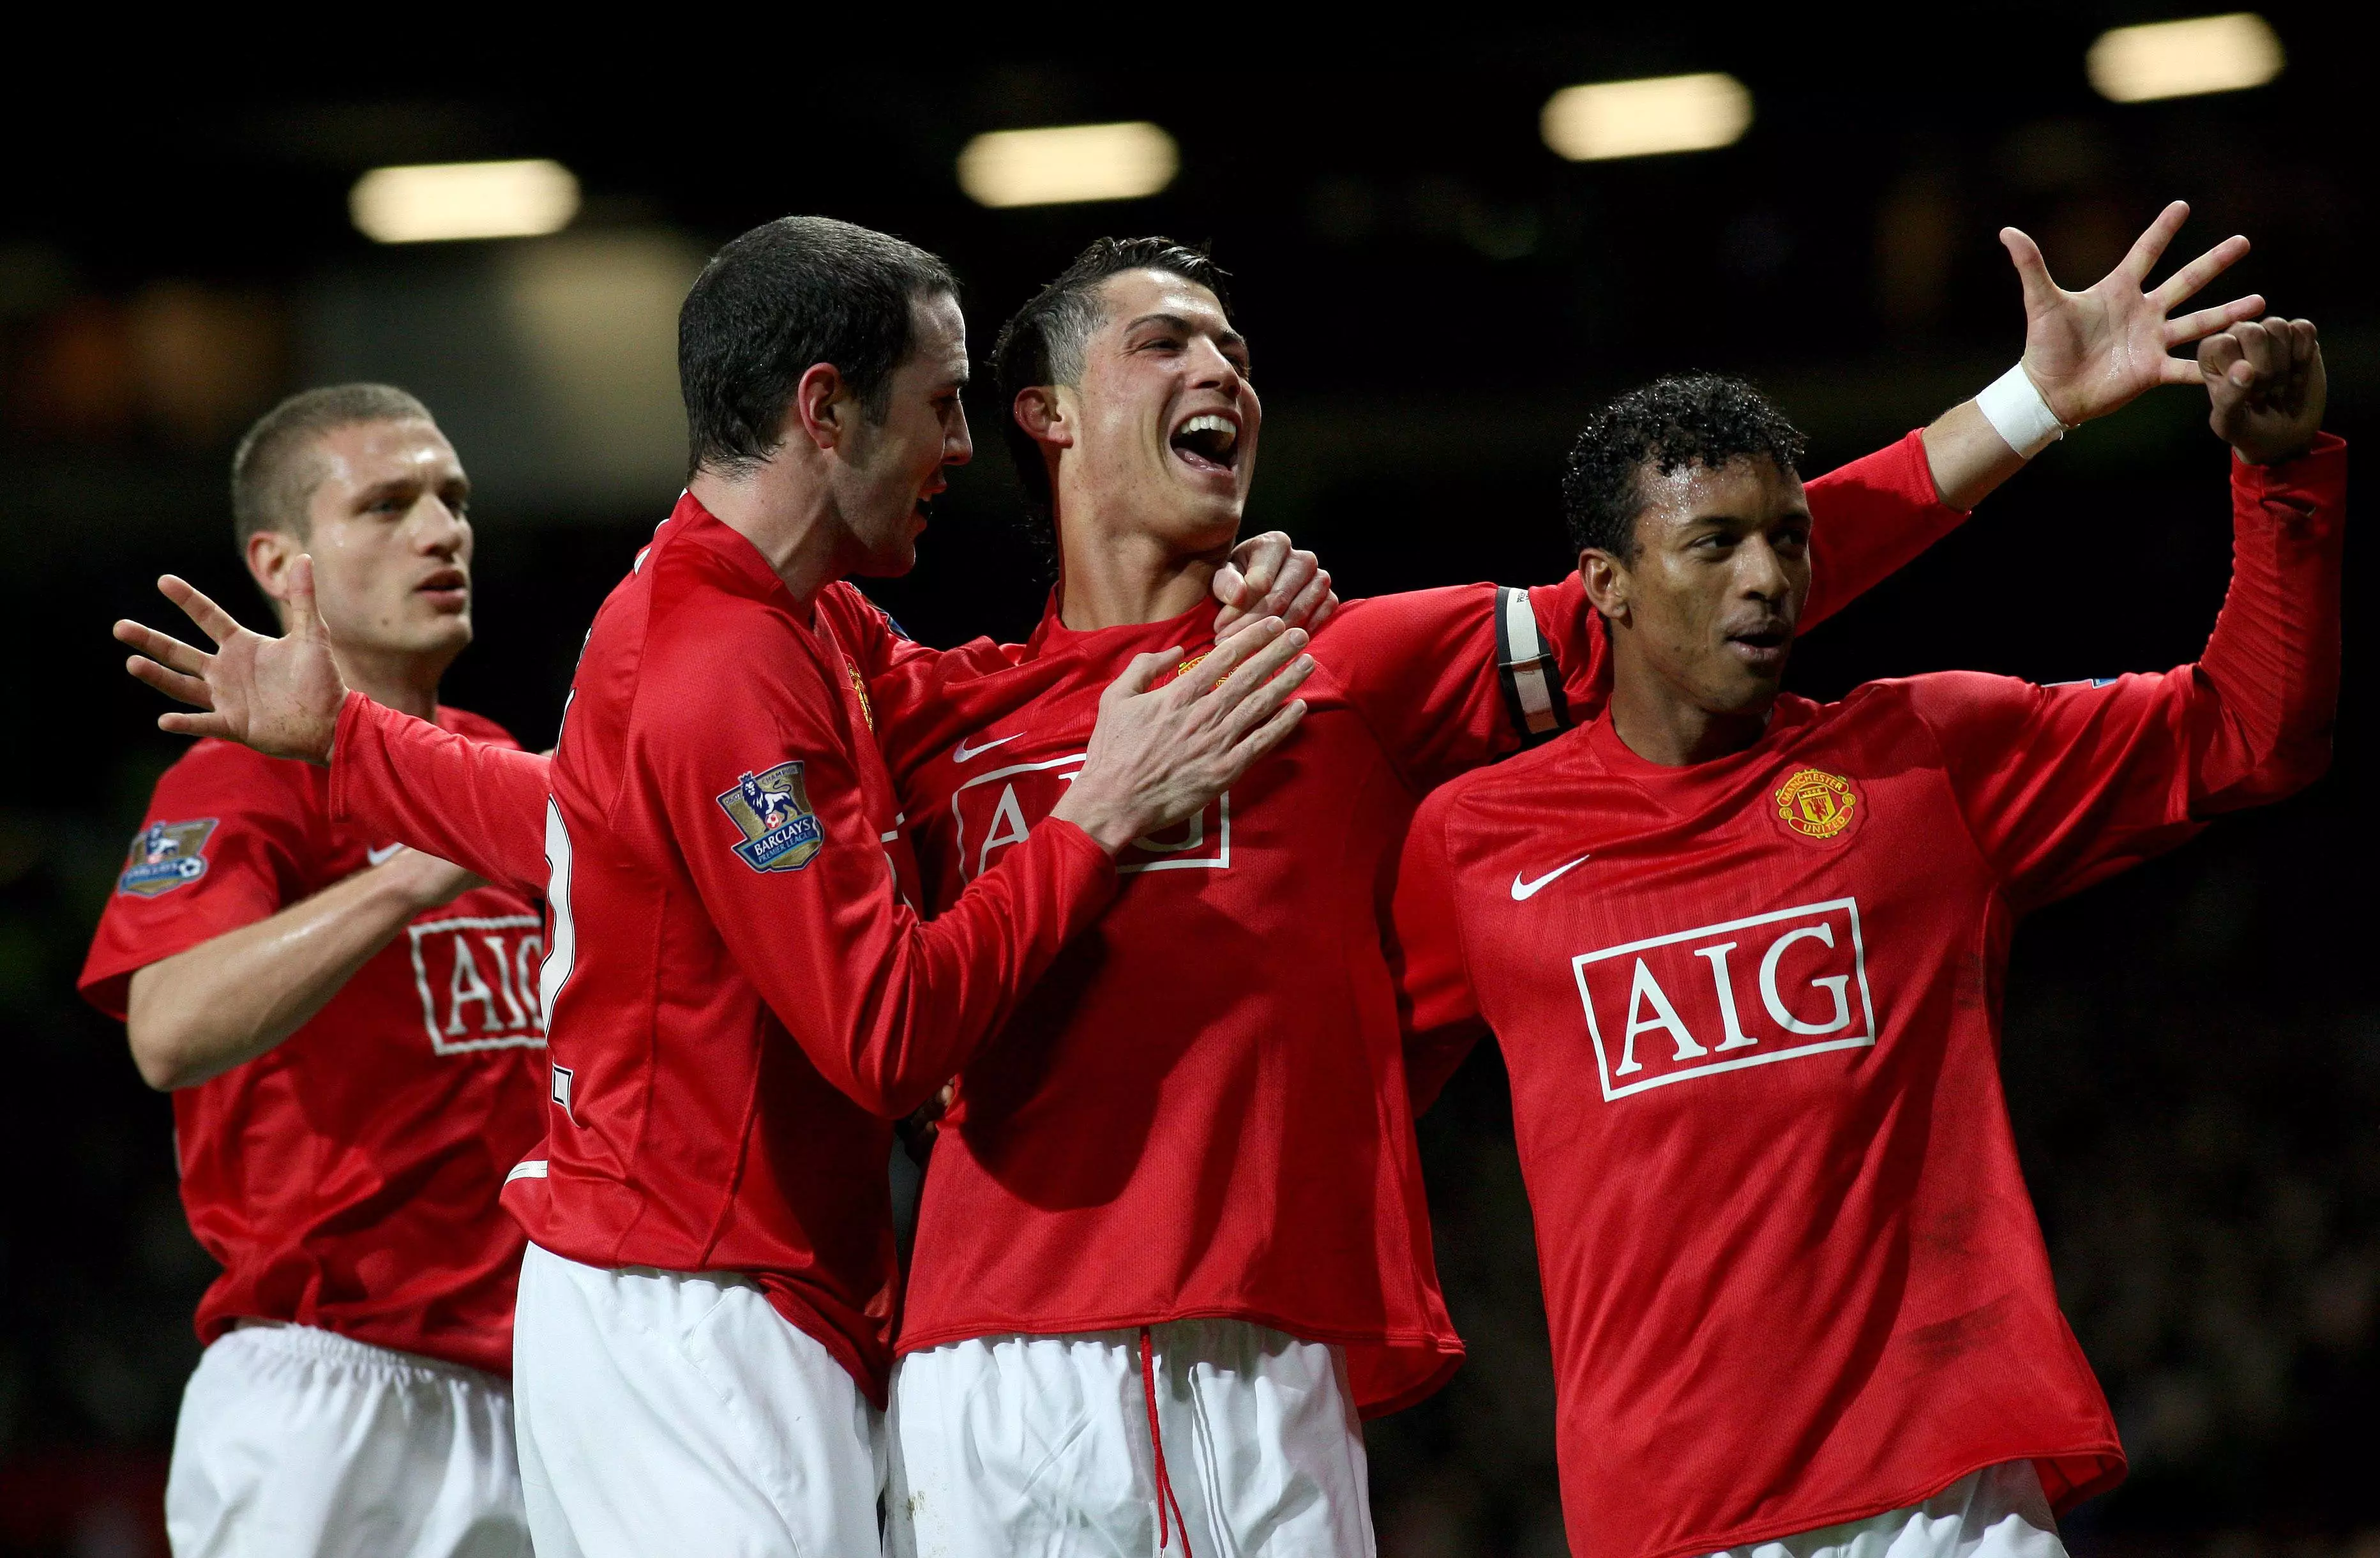 Manchester United's 2007-08 side are only the fifth best Premier League team ever, according to the study